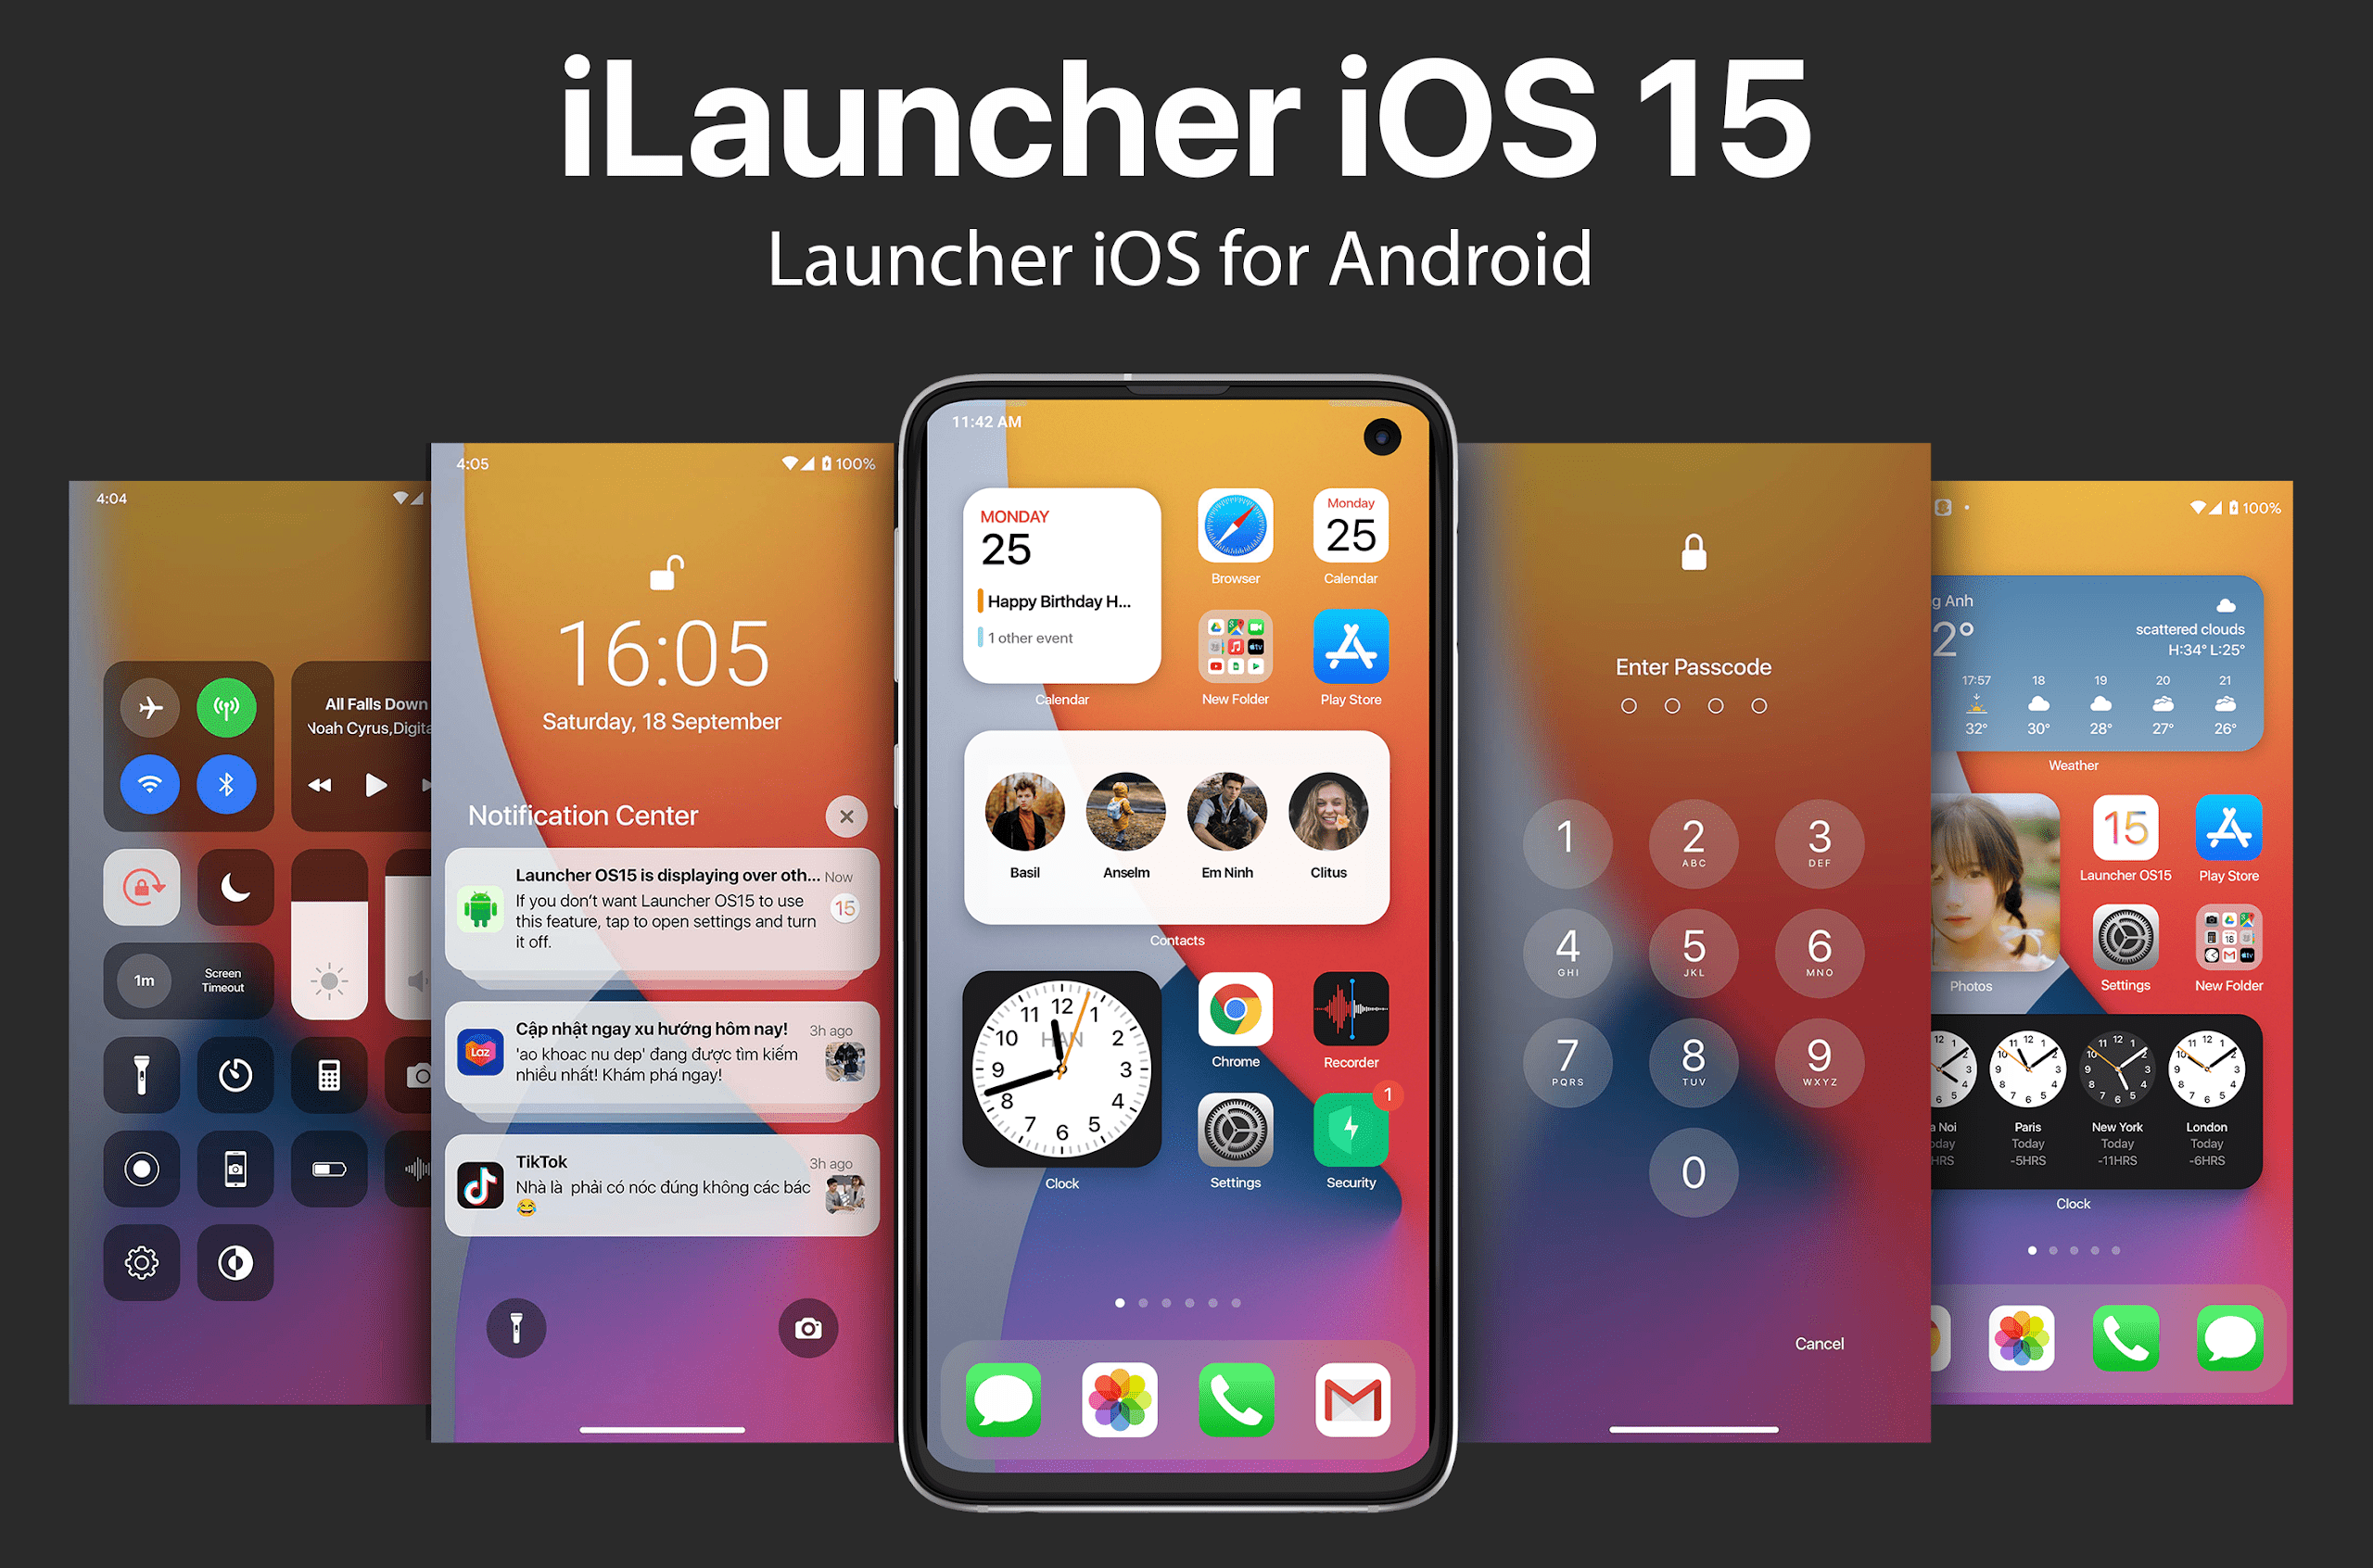 Launcher-iOS16-iLauncher-1.png